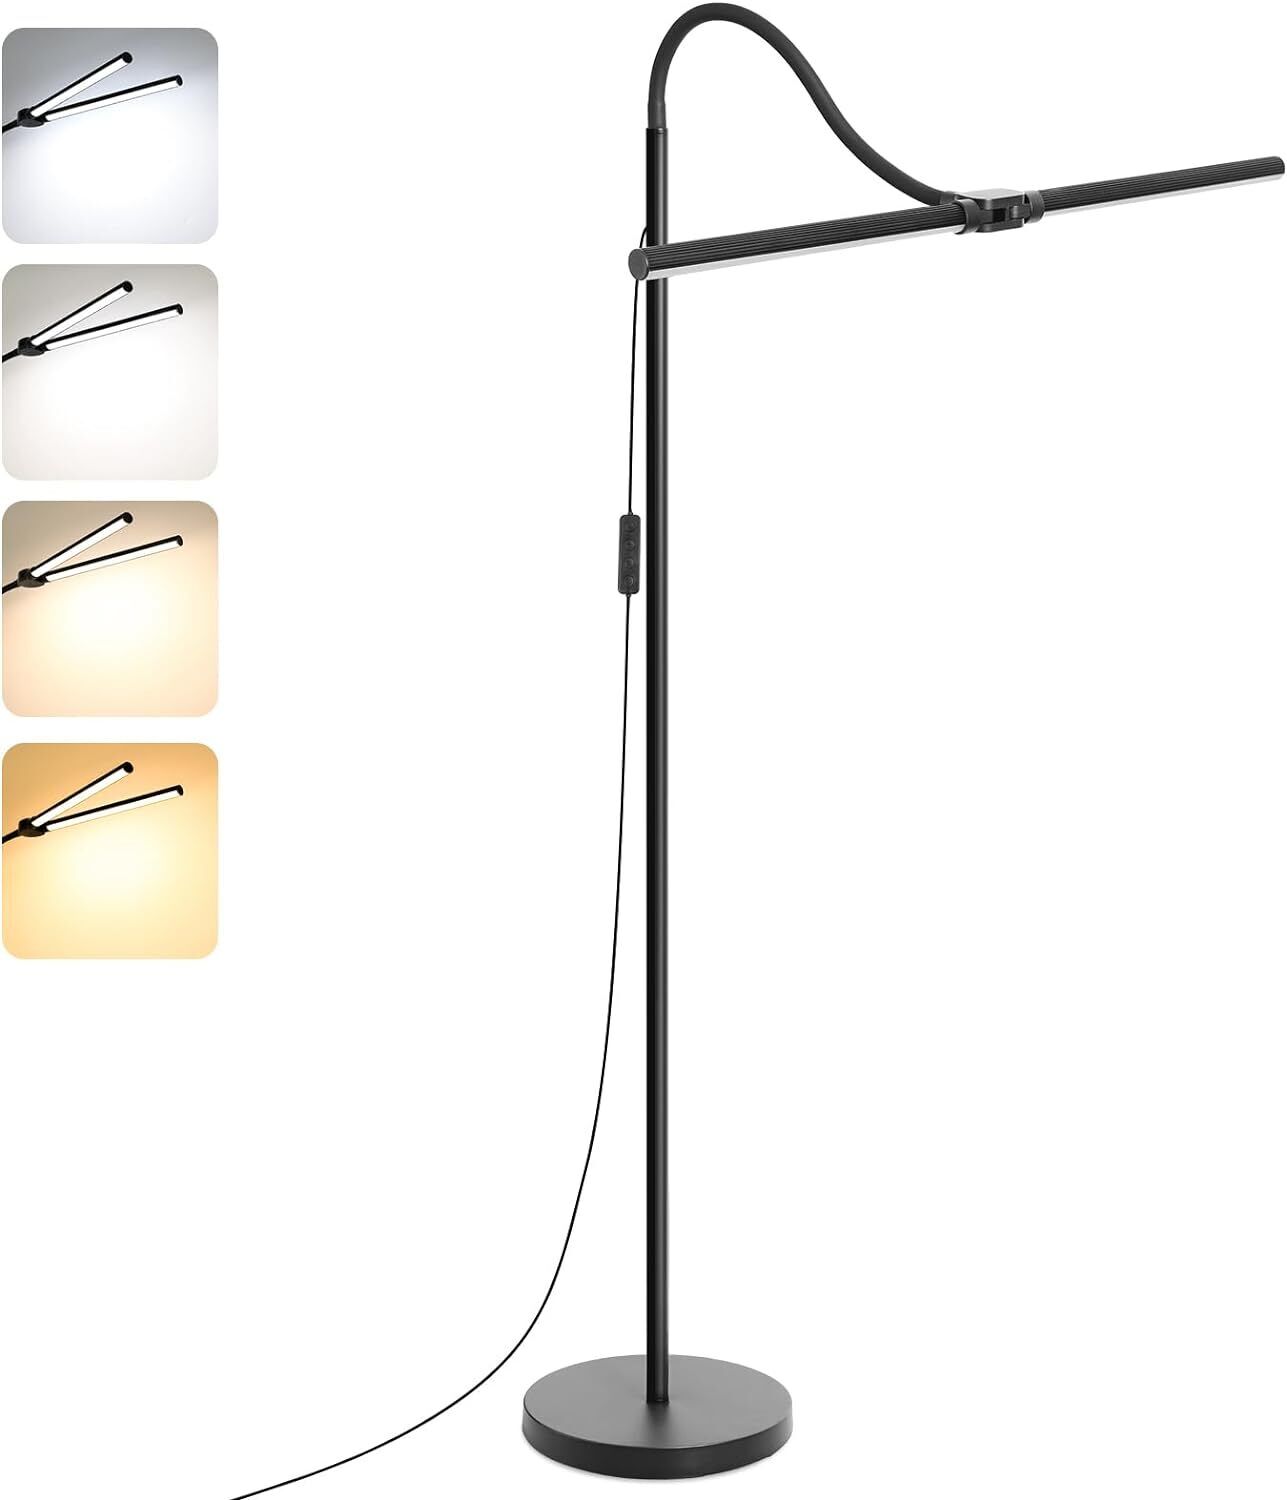 LED Floor Lamp, 15W/1800LM Bright Lamps for Living Room with Black 